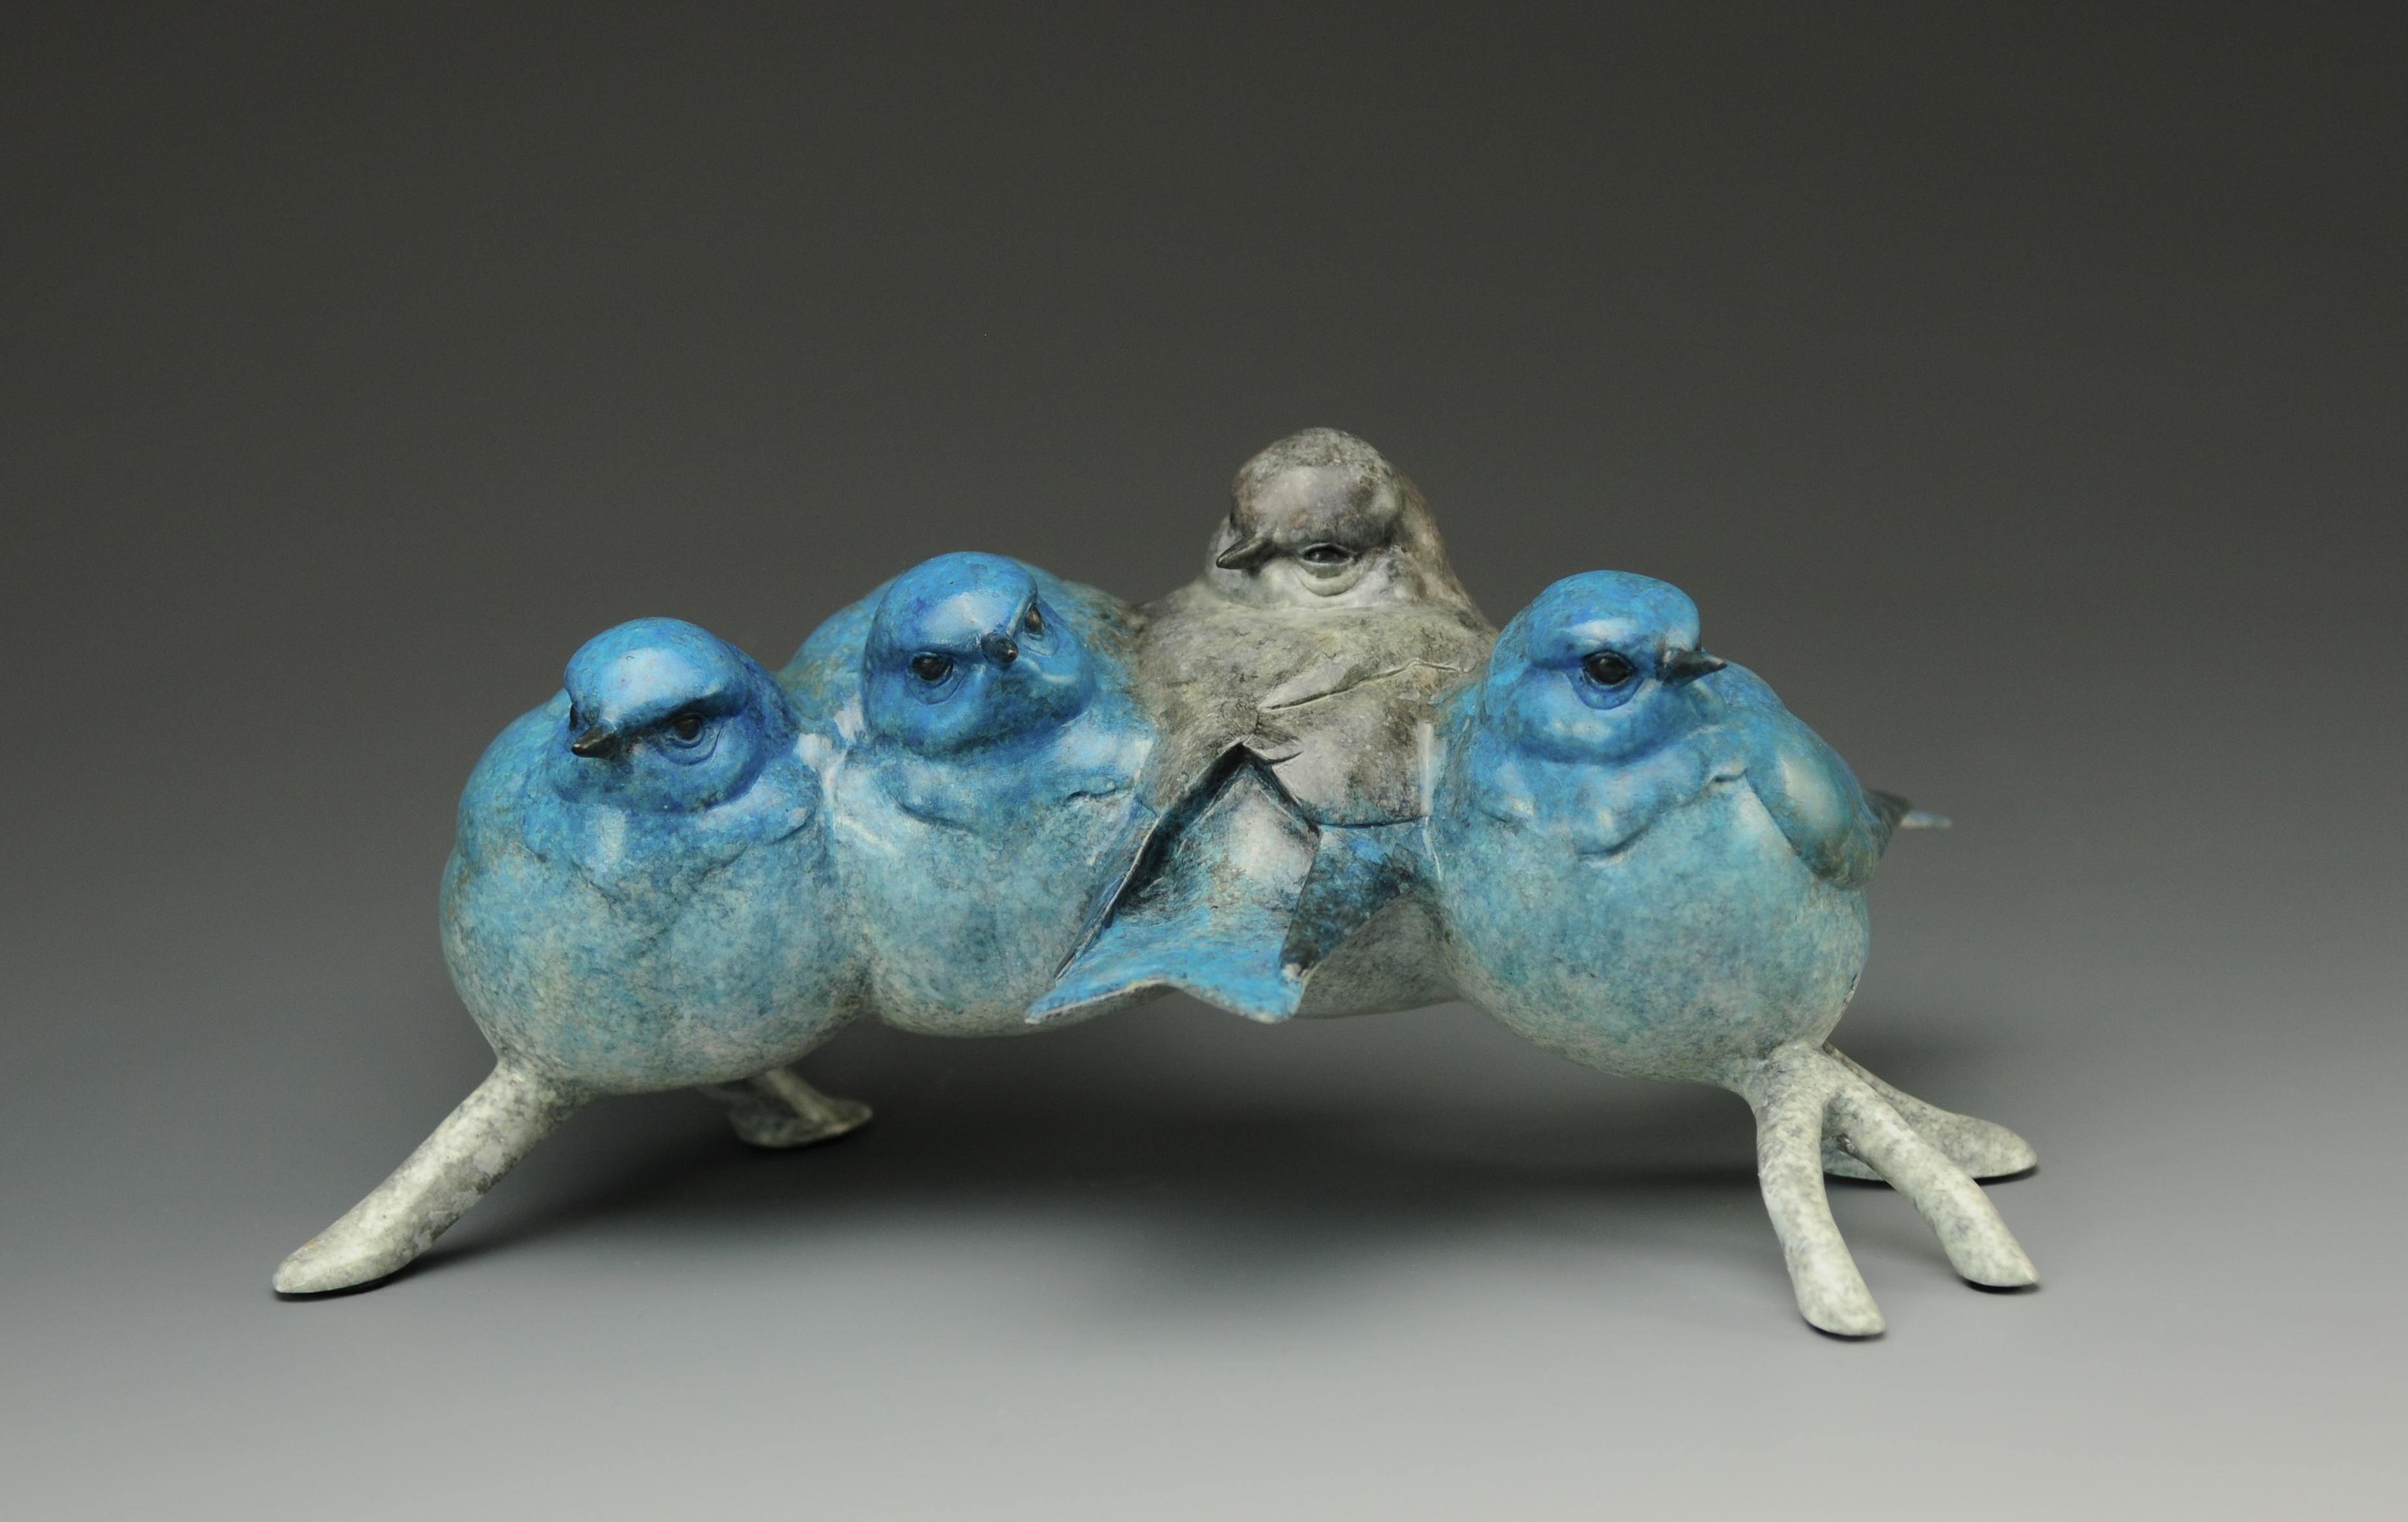 A Bronze Sculpture Of Songbirds By Jeremy Bradshaw Is Featured At Gallery Wild In Downtown Jackson Hole Wyoming